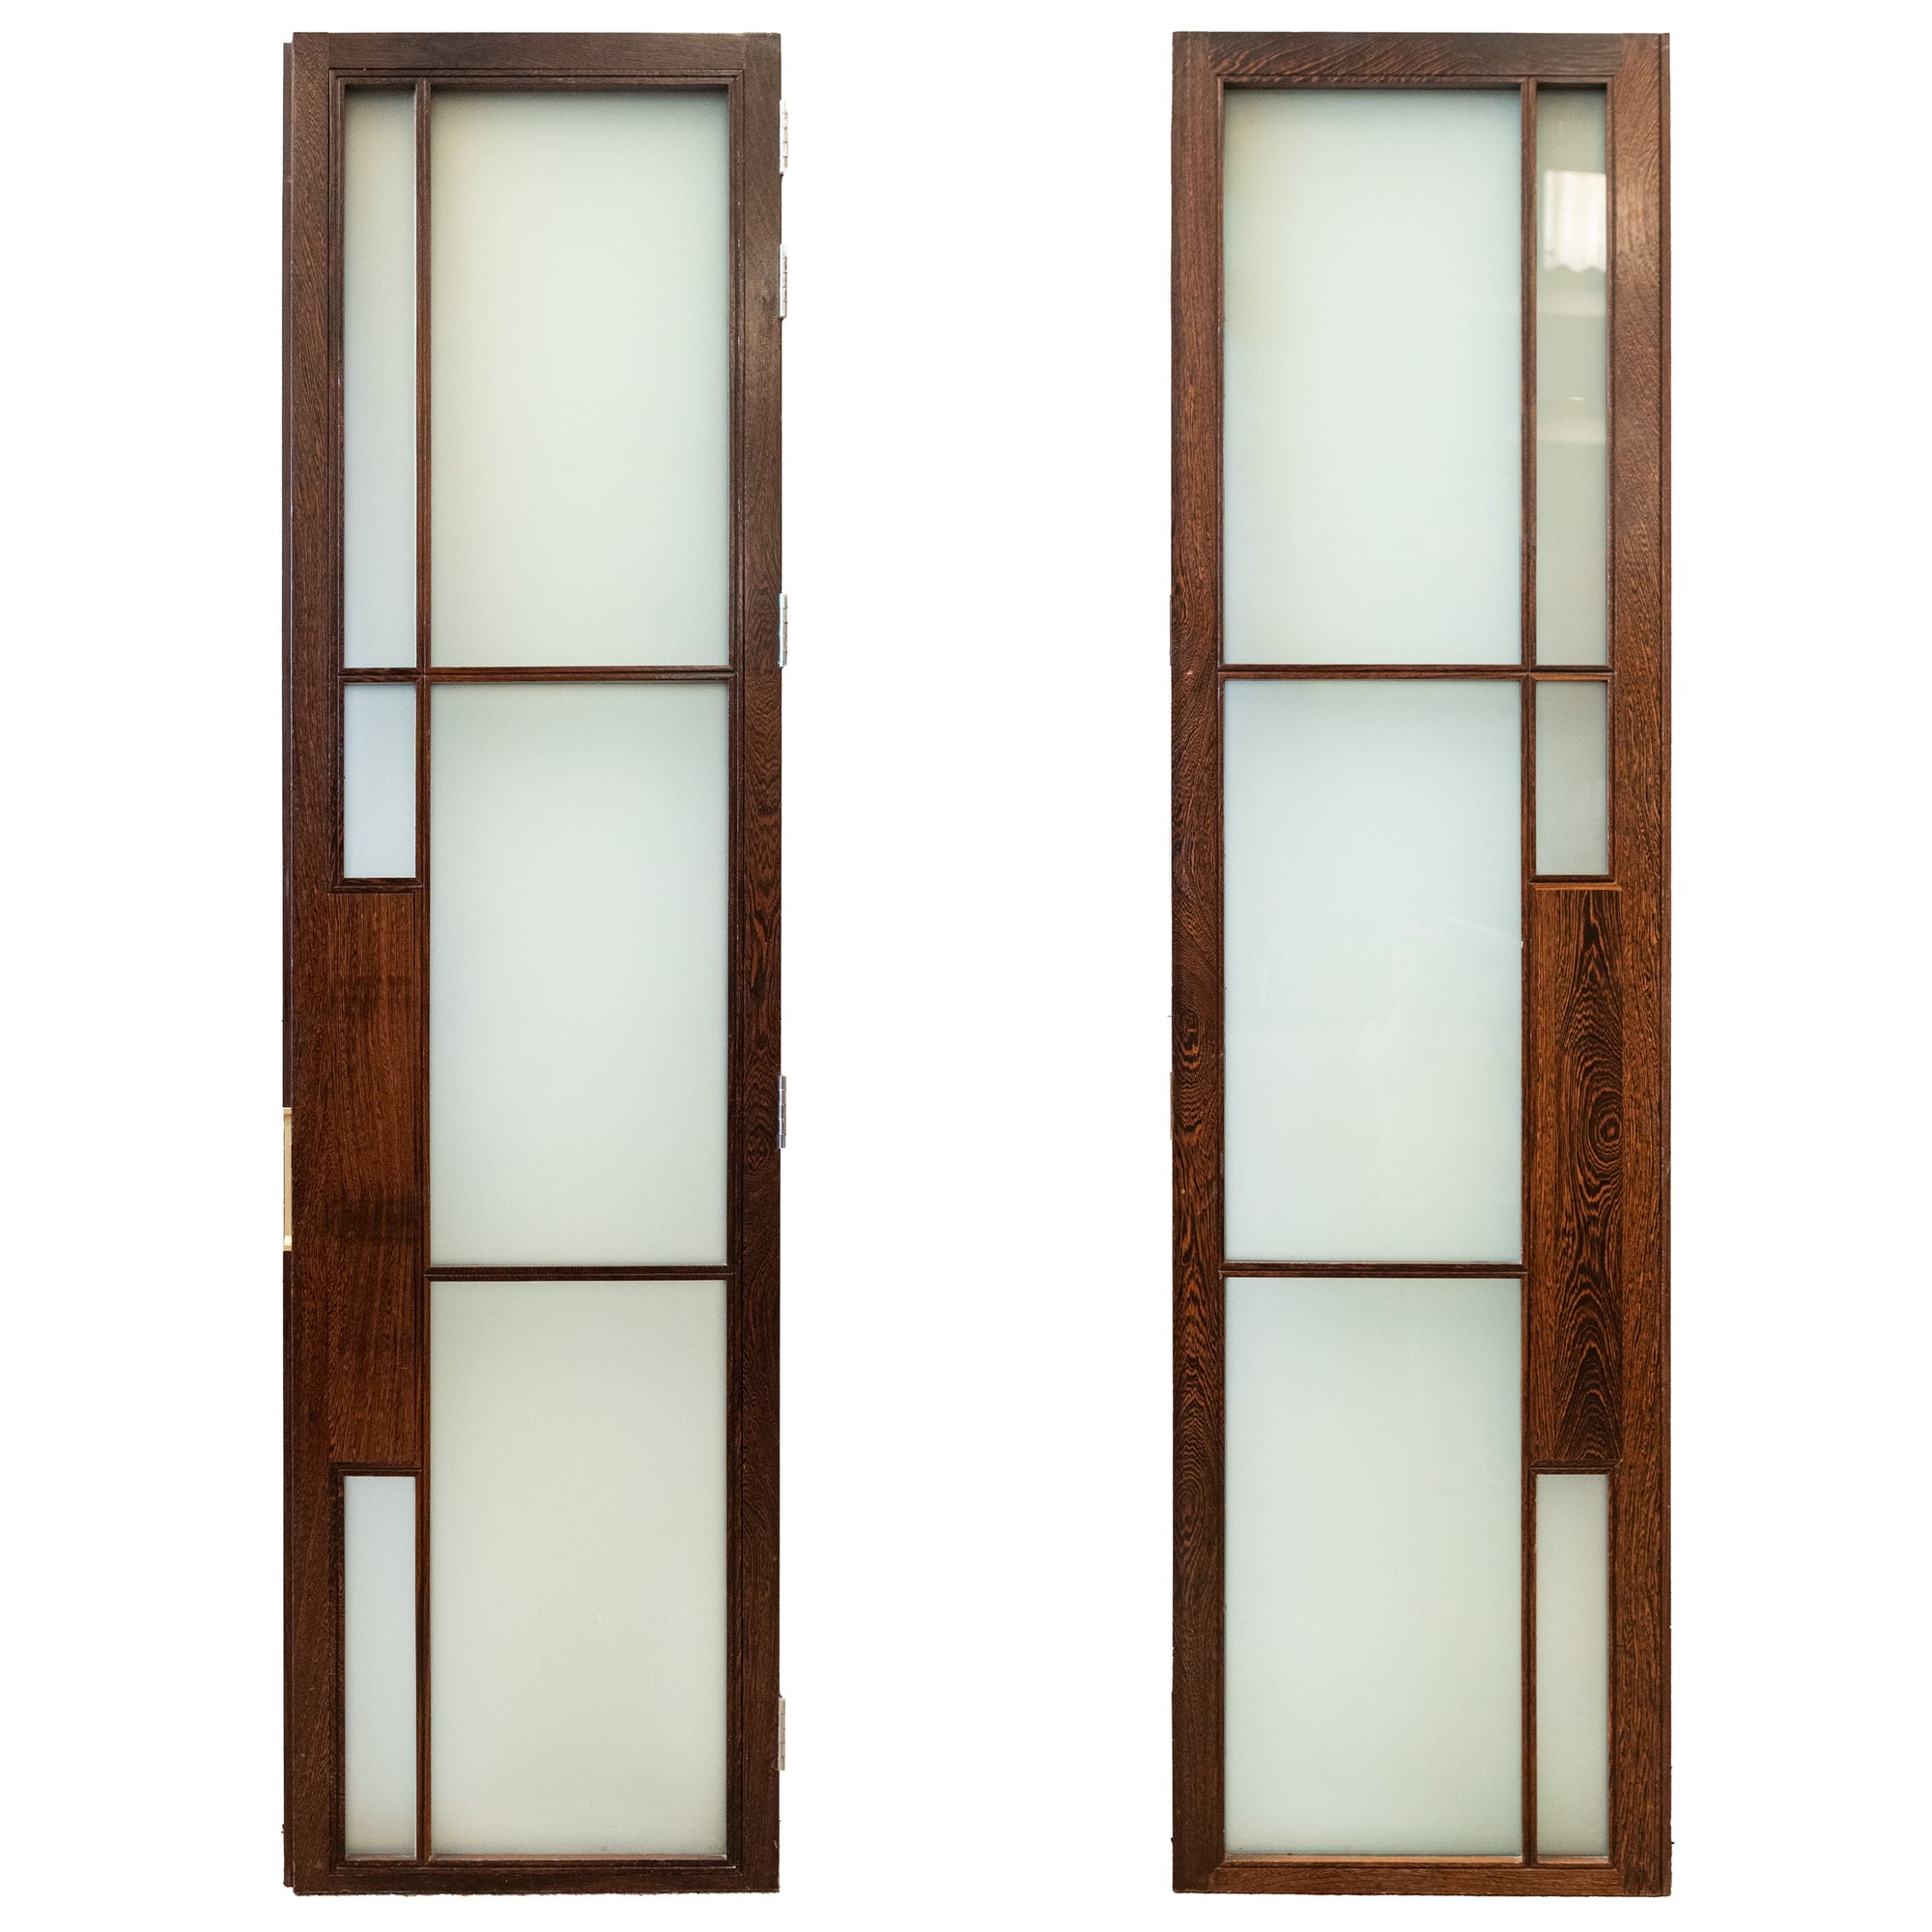 Large Panga Panga Door With Frosted Glass | The Architectural Forum